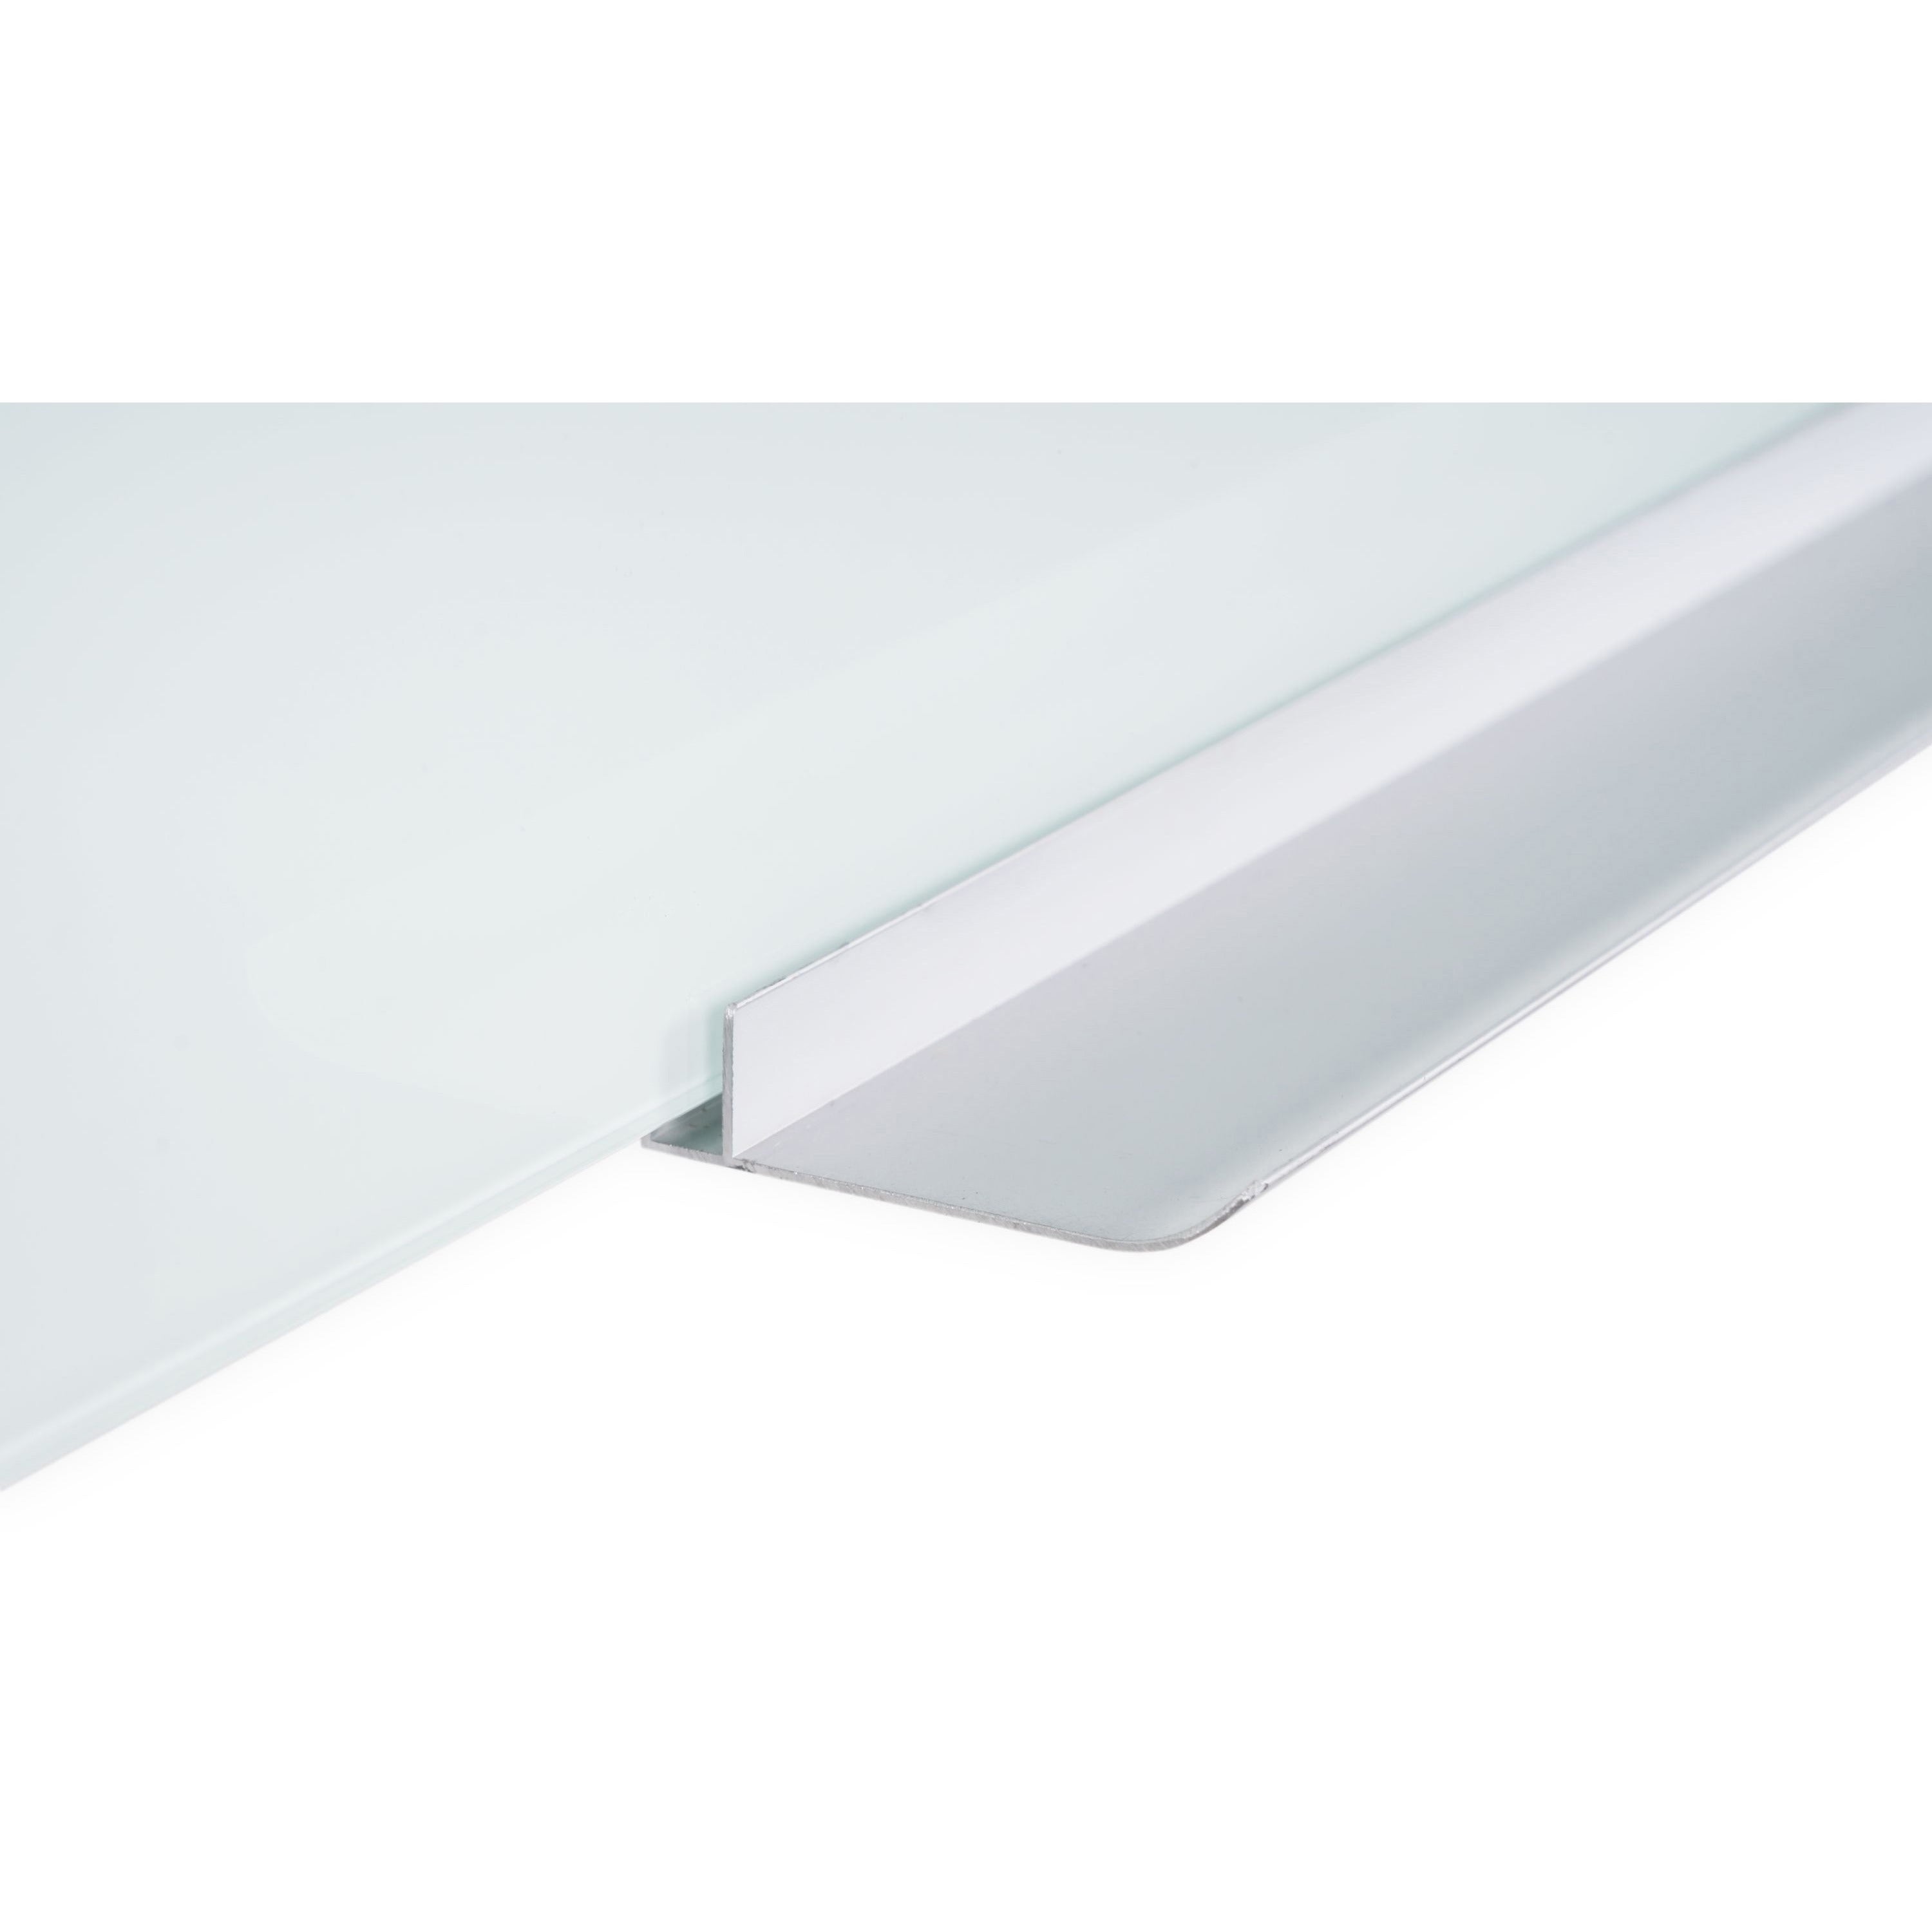 bi-silque-dry-erase-glass-board-36-3-ft-width-x-48-4-ft-height-white-glass-surface-rectangle-horizontal-vertical-1-each_bvcgl084407 - 2